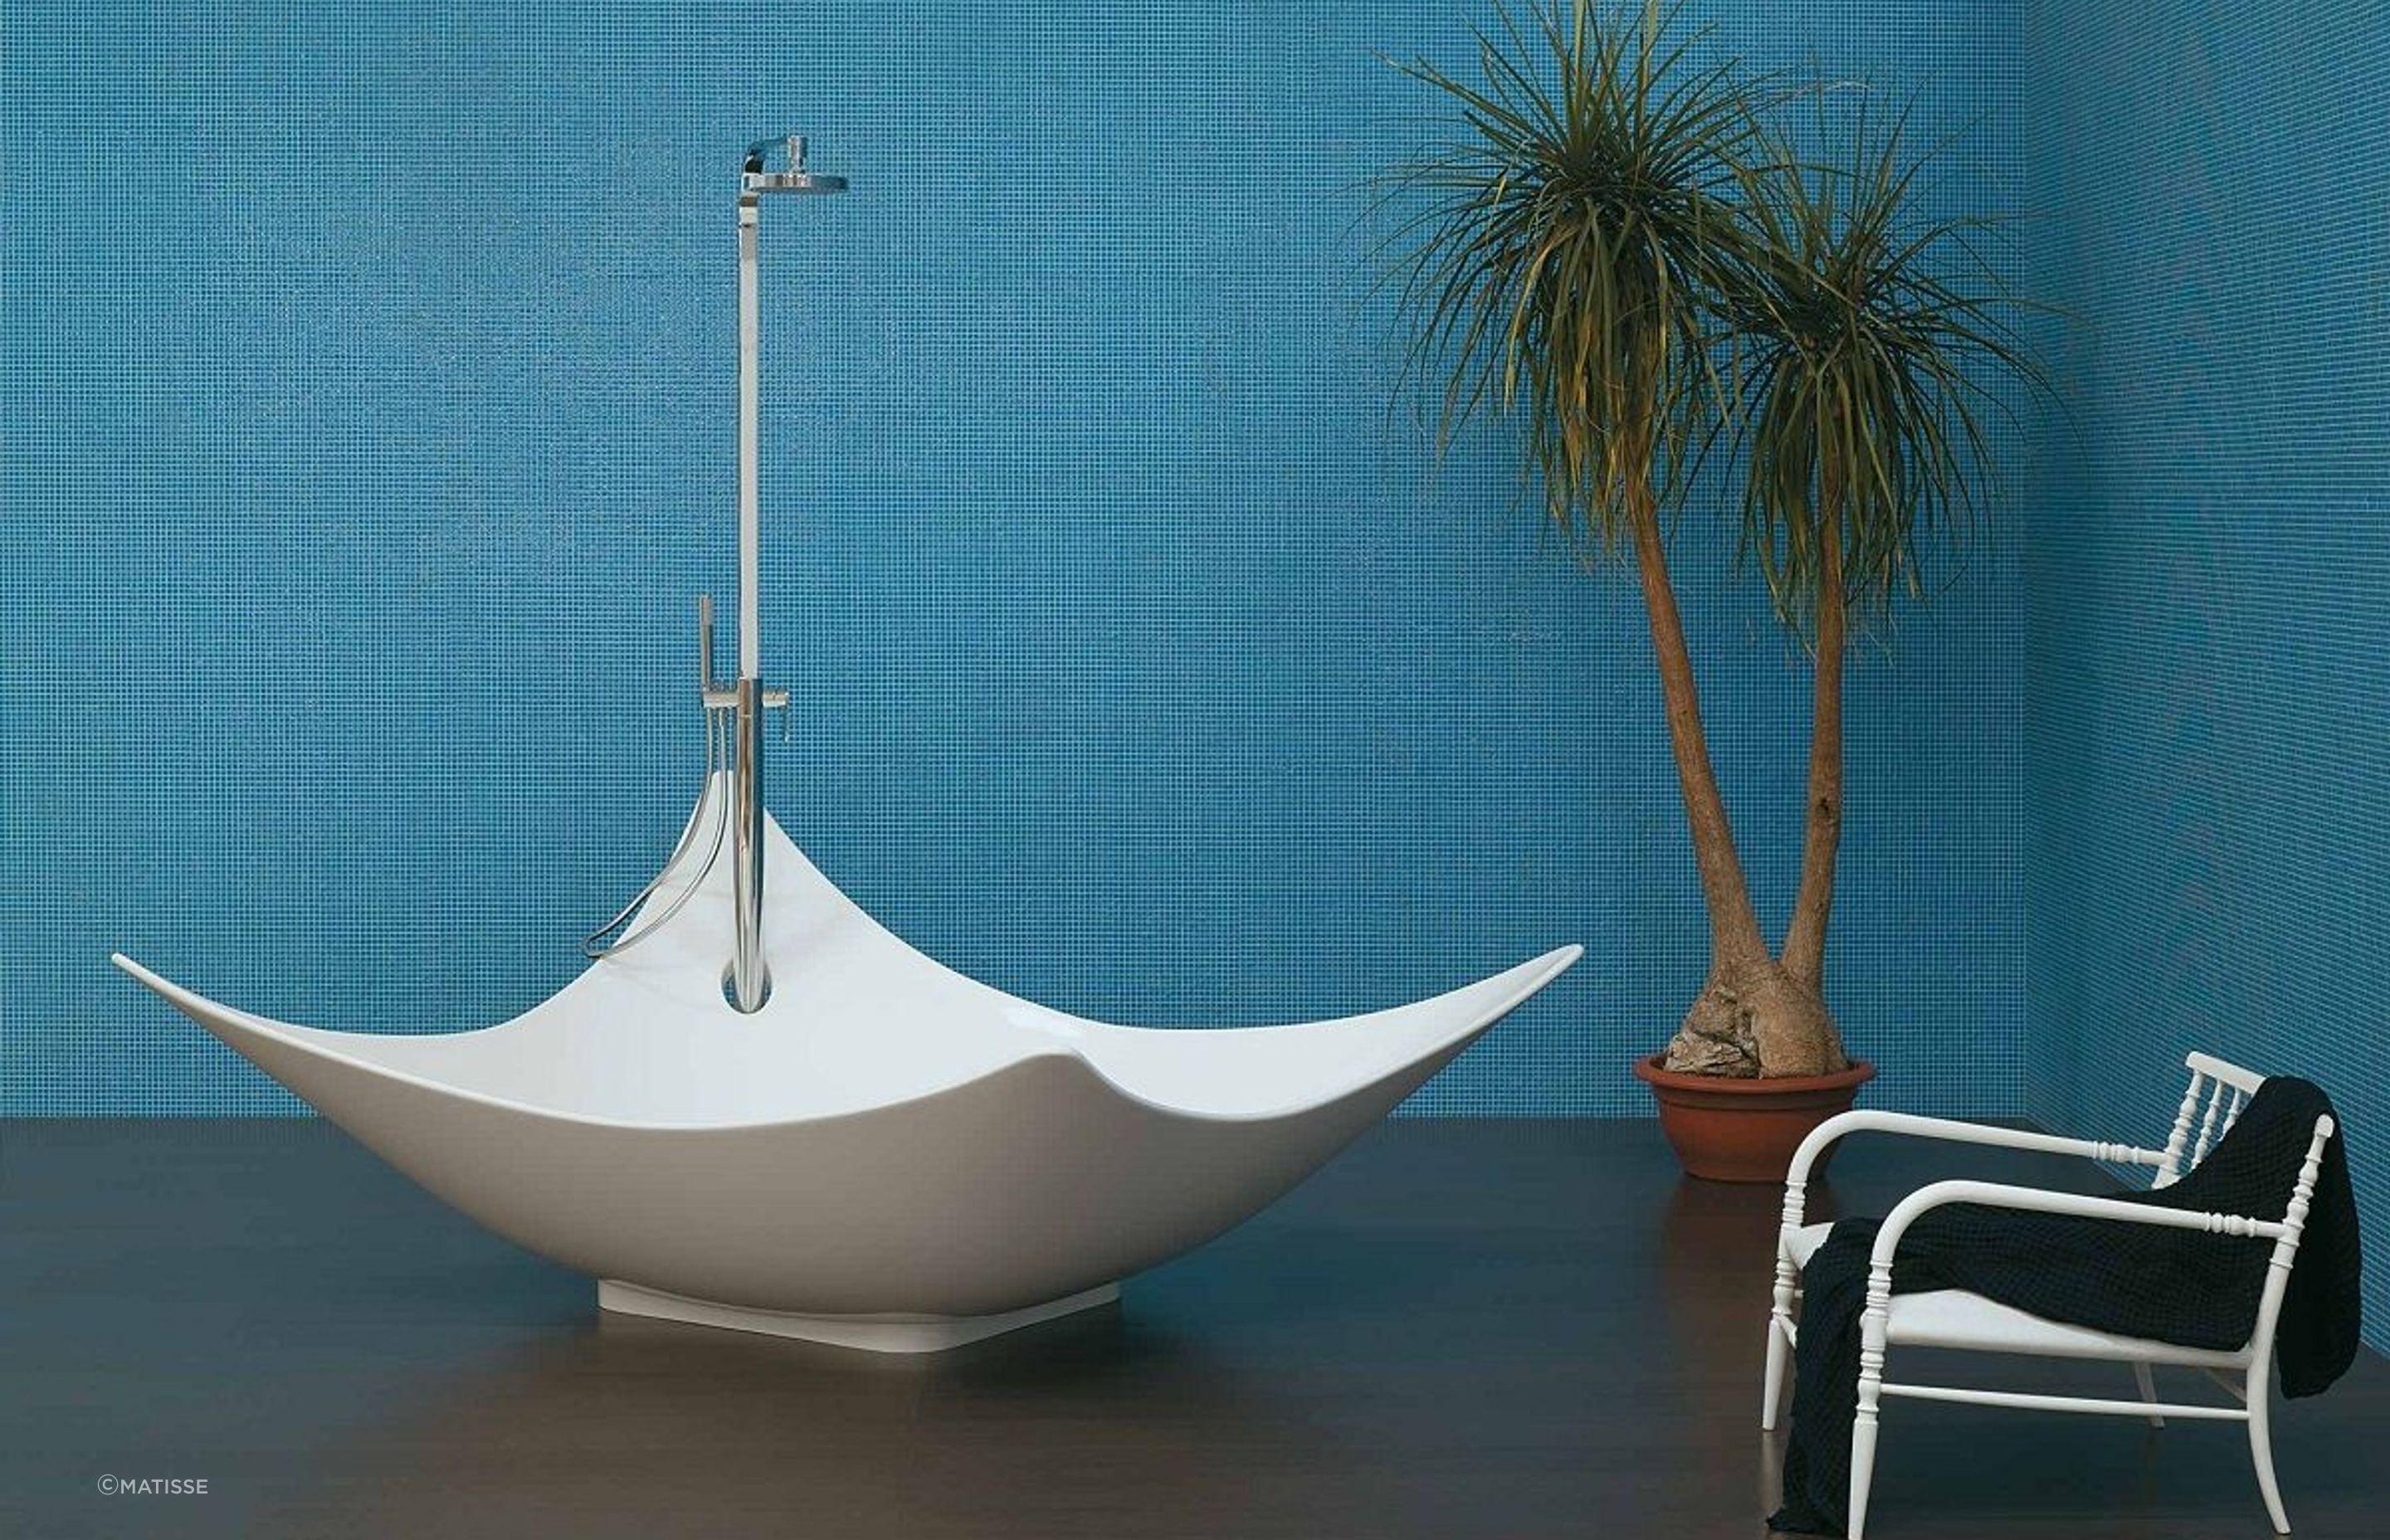 It's all about the dimensions with the wonderful Leggera Bath by Flaminia